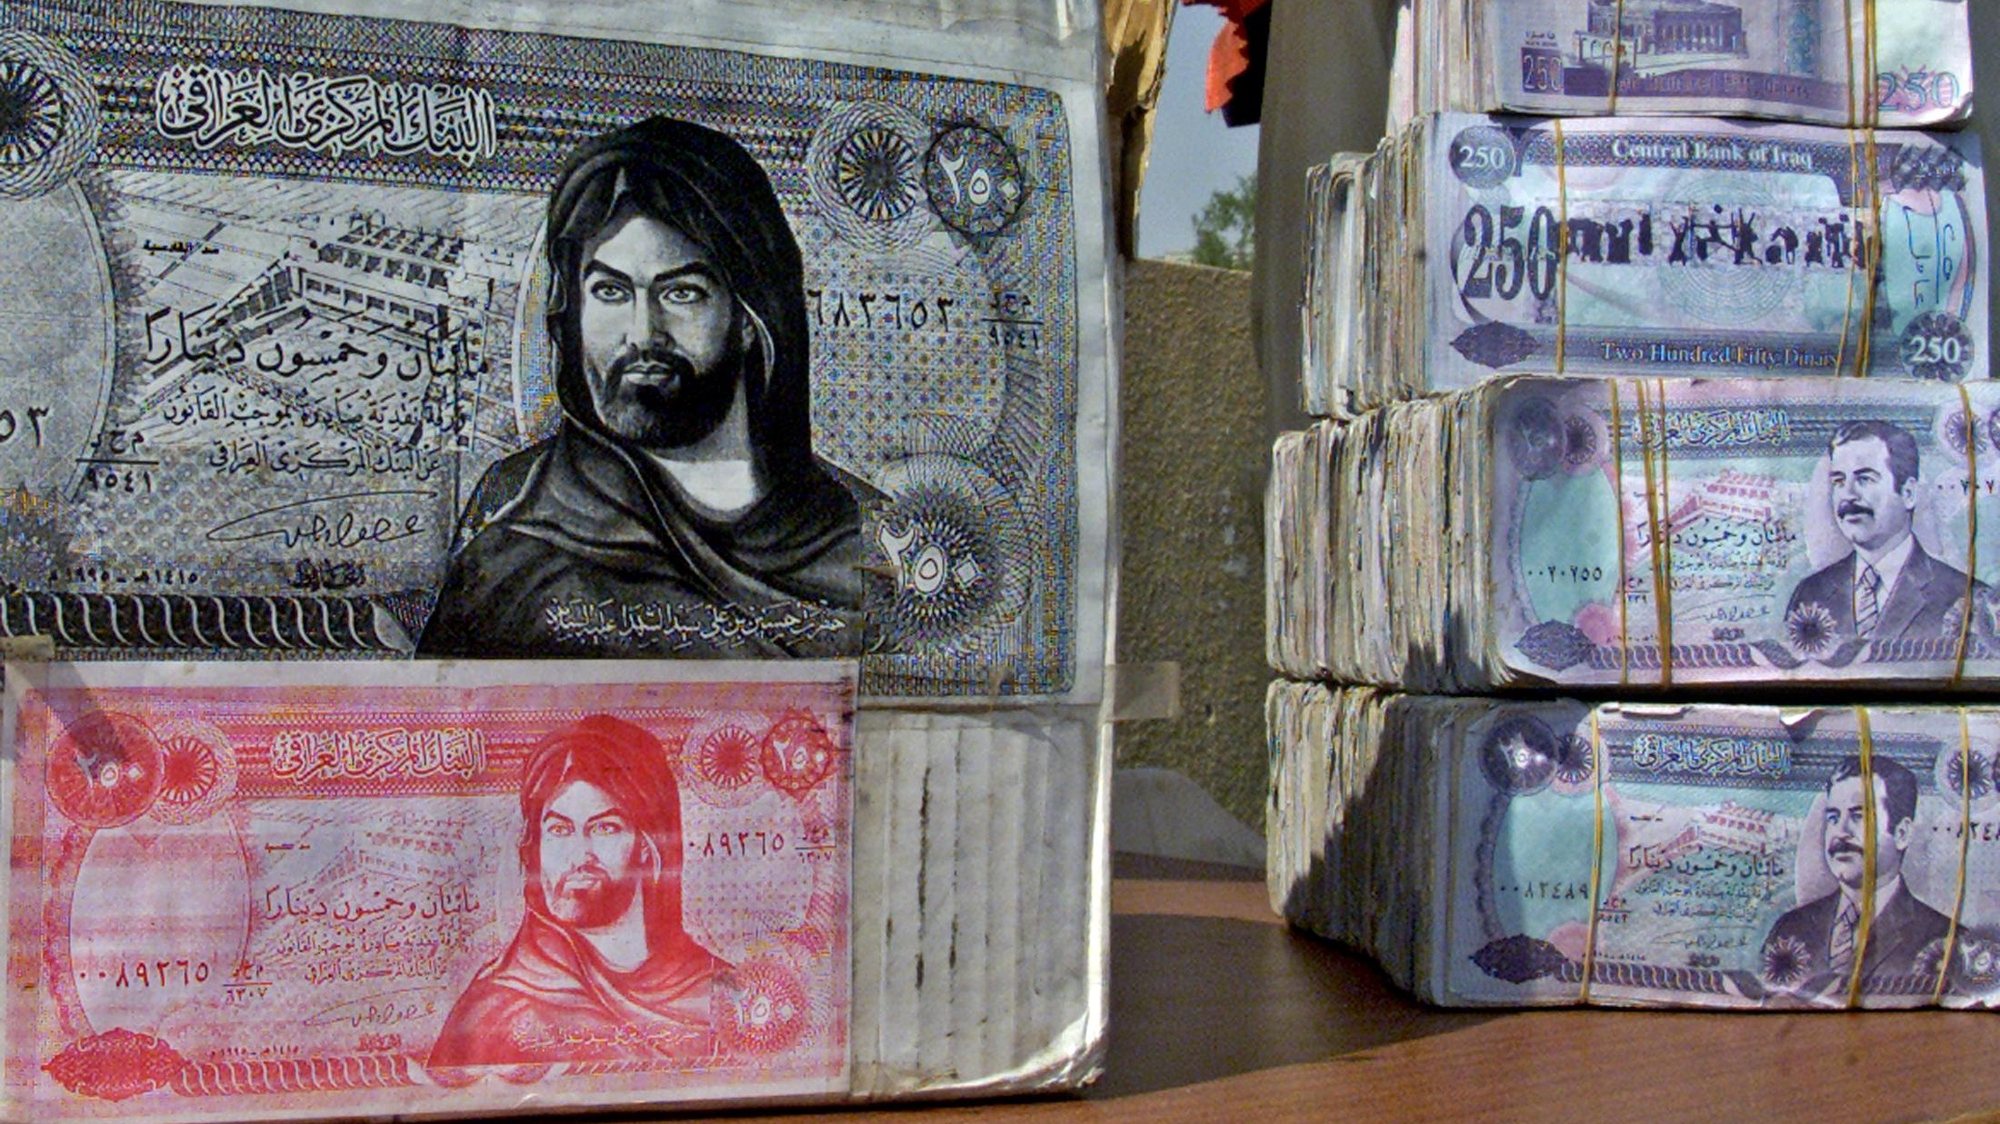 Iraqi Dinar banknotes showing toppled leader Saddam Hussein and counterfeit money (L) showing Imam Hussein, the martyred grandson of Islam&#039;s Prophet Mohammed, are seen on a stall in Fardous Square or &quot;Paradise Square&quot; in Baghdad 27 June 2003. The money-changer, who is a Shiite Muslim, explained that when the coalition forces leave, the people of Iraq, 80% of who are Shiites, would like their currency to look like this. AFP PHOTO/Sabah ARAR